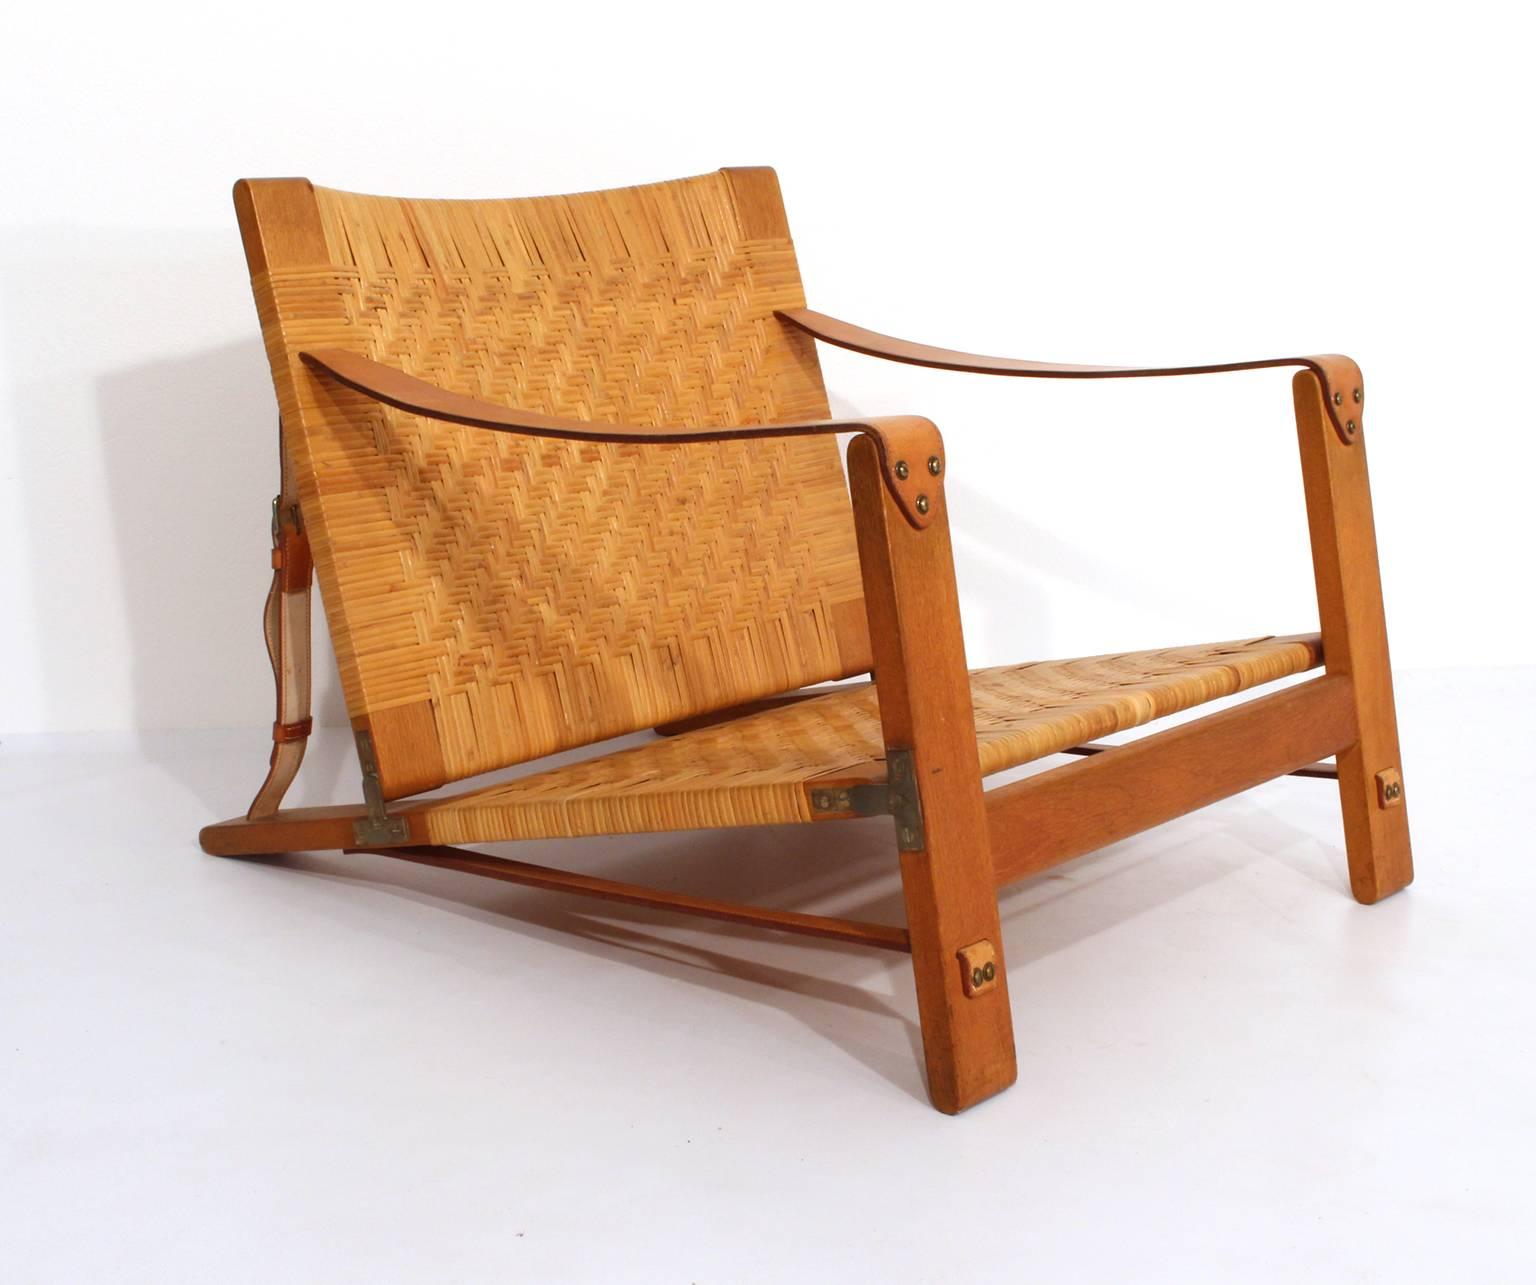 Hunting chair design Børge Mogensen, 1955.
Made by cabinetmaker Erhard Rasmussen, Copenhagen, Denmark.
This rare model were made in oak, cane, leather and brass.

Attached photo from The Copenhagen Cabinetmakers Guild Exhibitions, 1955.
see